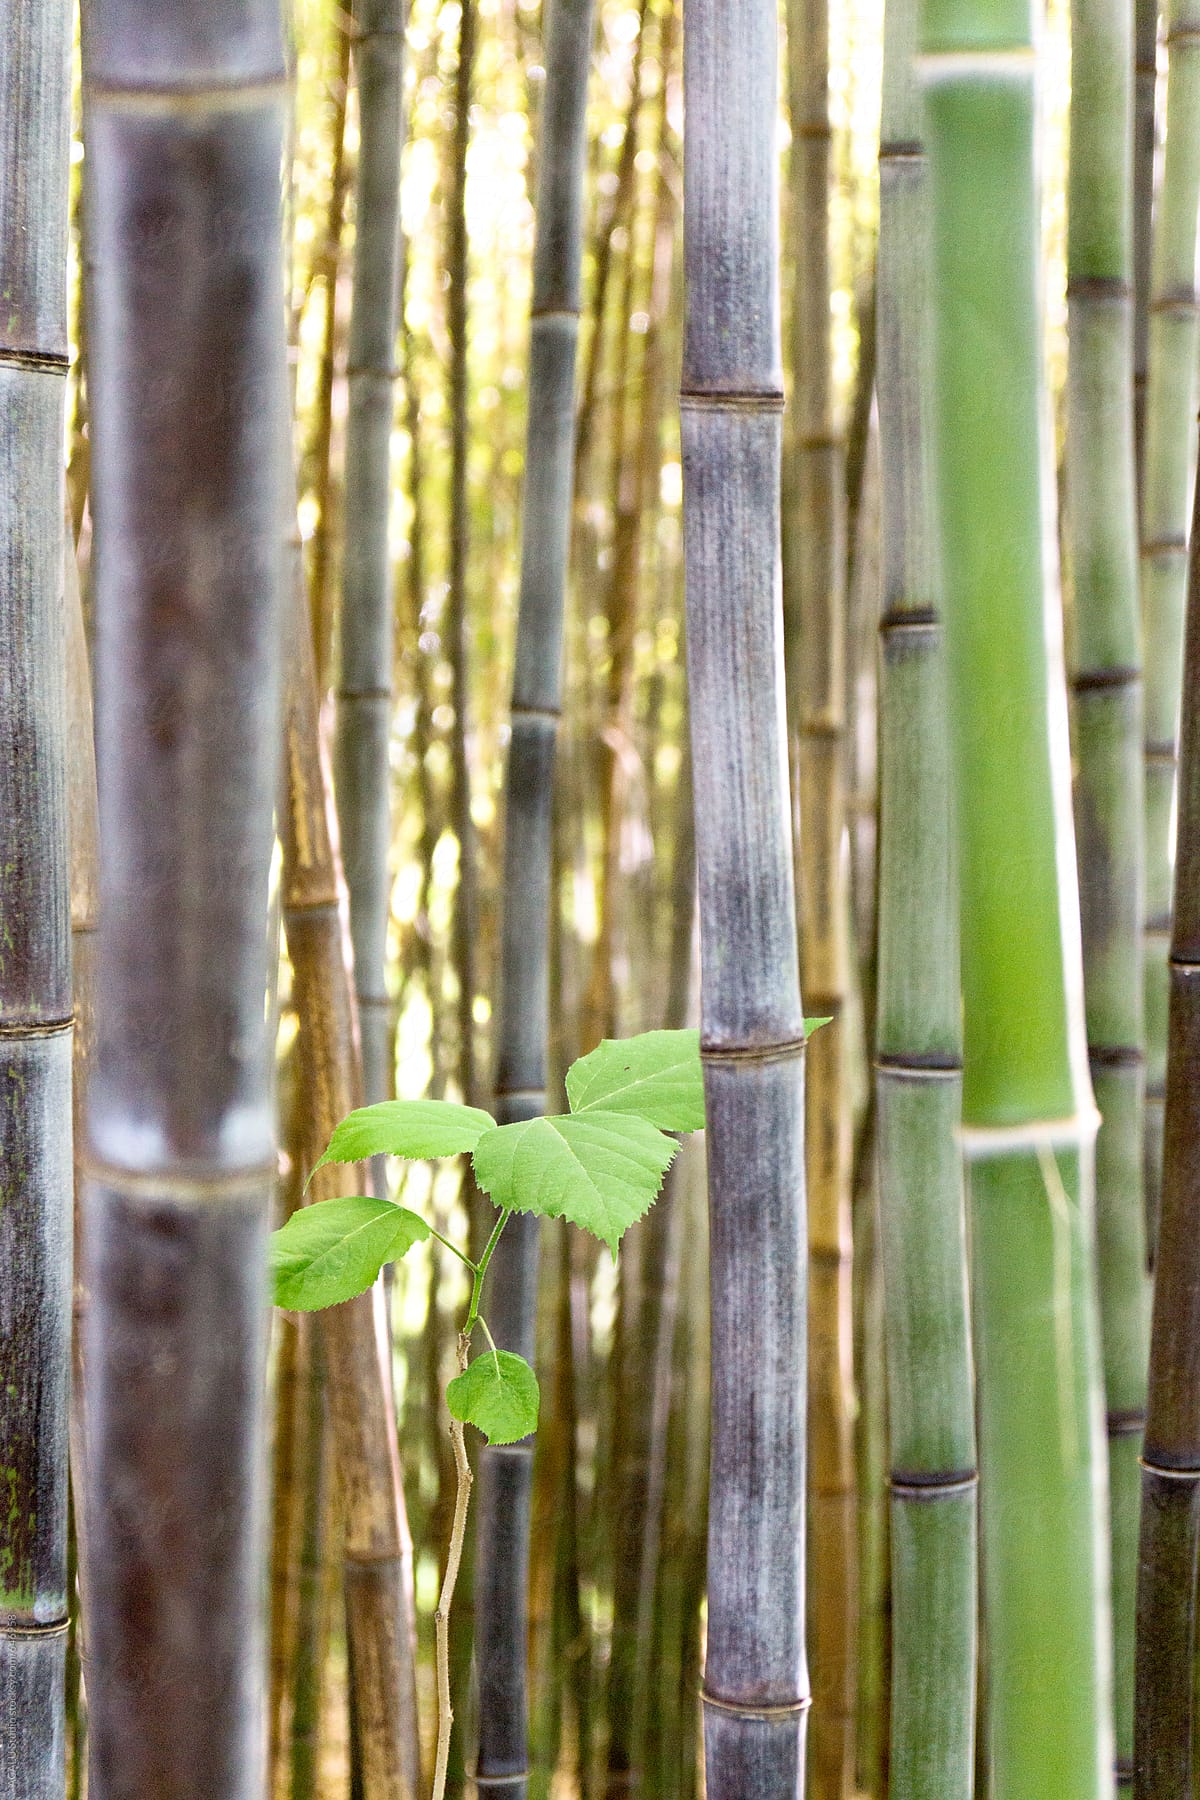 Small plant in a bamboo forest